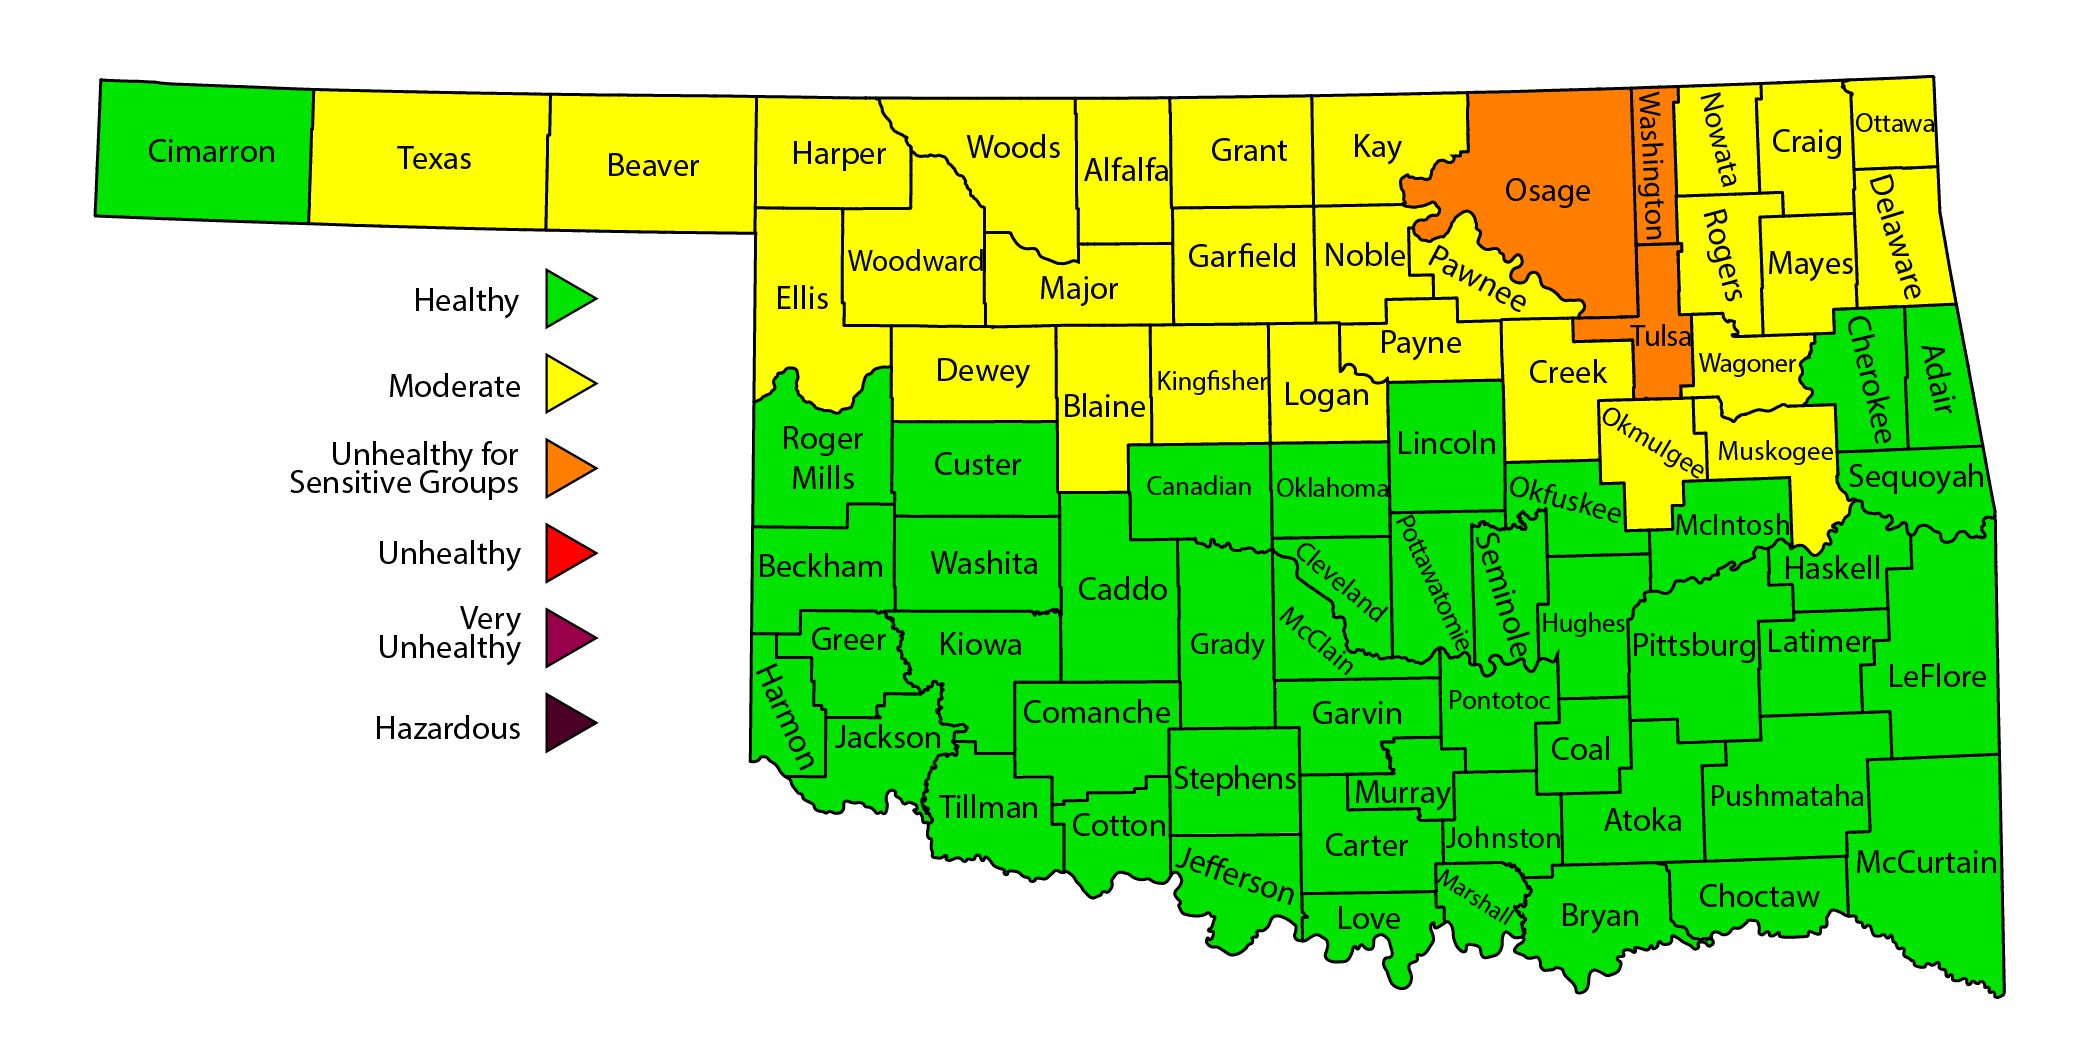 For a graphic of affected counties, visit https://www.deq.ok.gov/air-quality-division/air-quality-health-advisory/